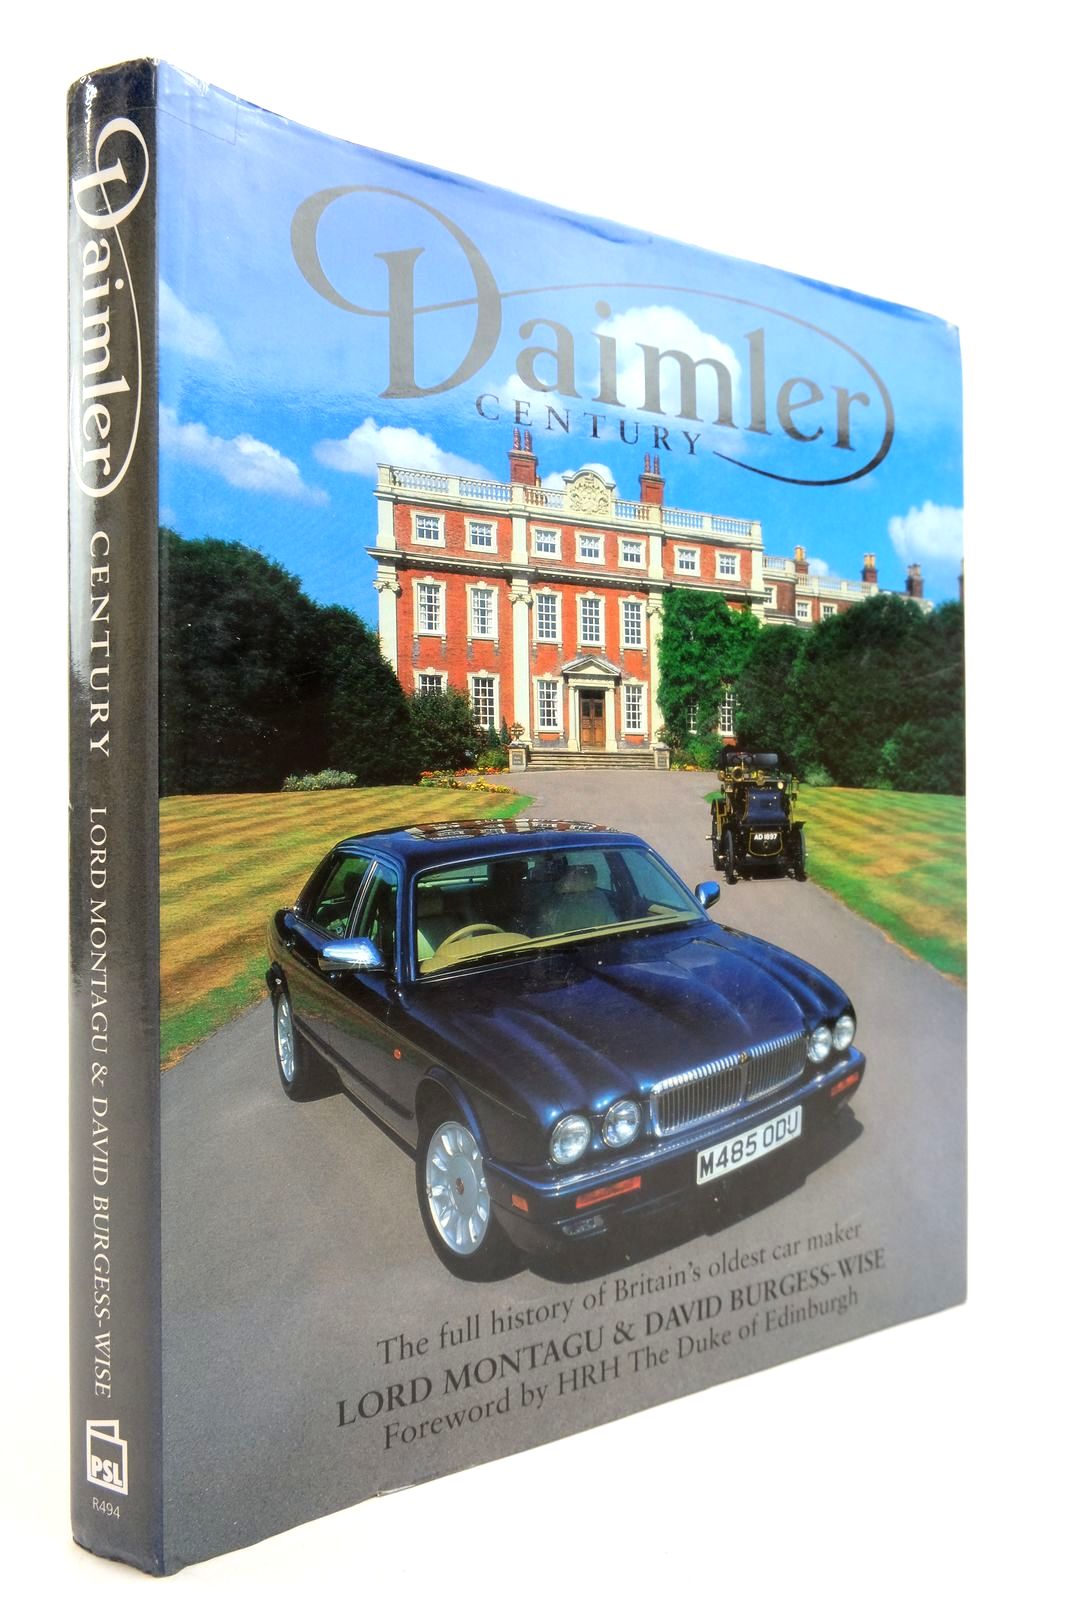 Photo of DAIMLER CENTURY THE FULL HISTORY OF BRITAIN'S OLDEST CAR MAKER written by Montagu, Lord Burgess-Wise, David illustrated by Robinson, W. Heath published by Patrick Stephens Limited (STOCK CODE: 2139382)  for sale by Stella & Rose's Books